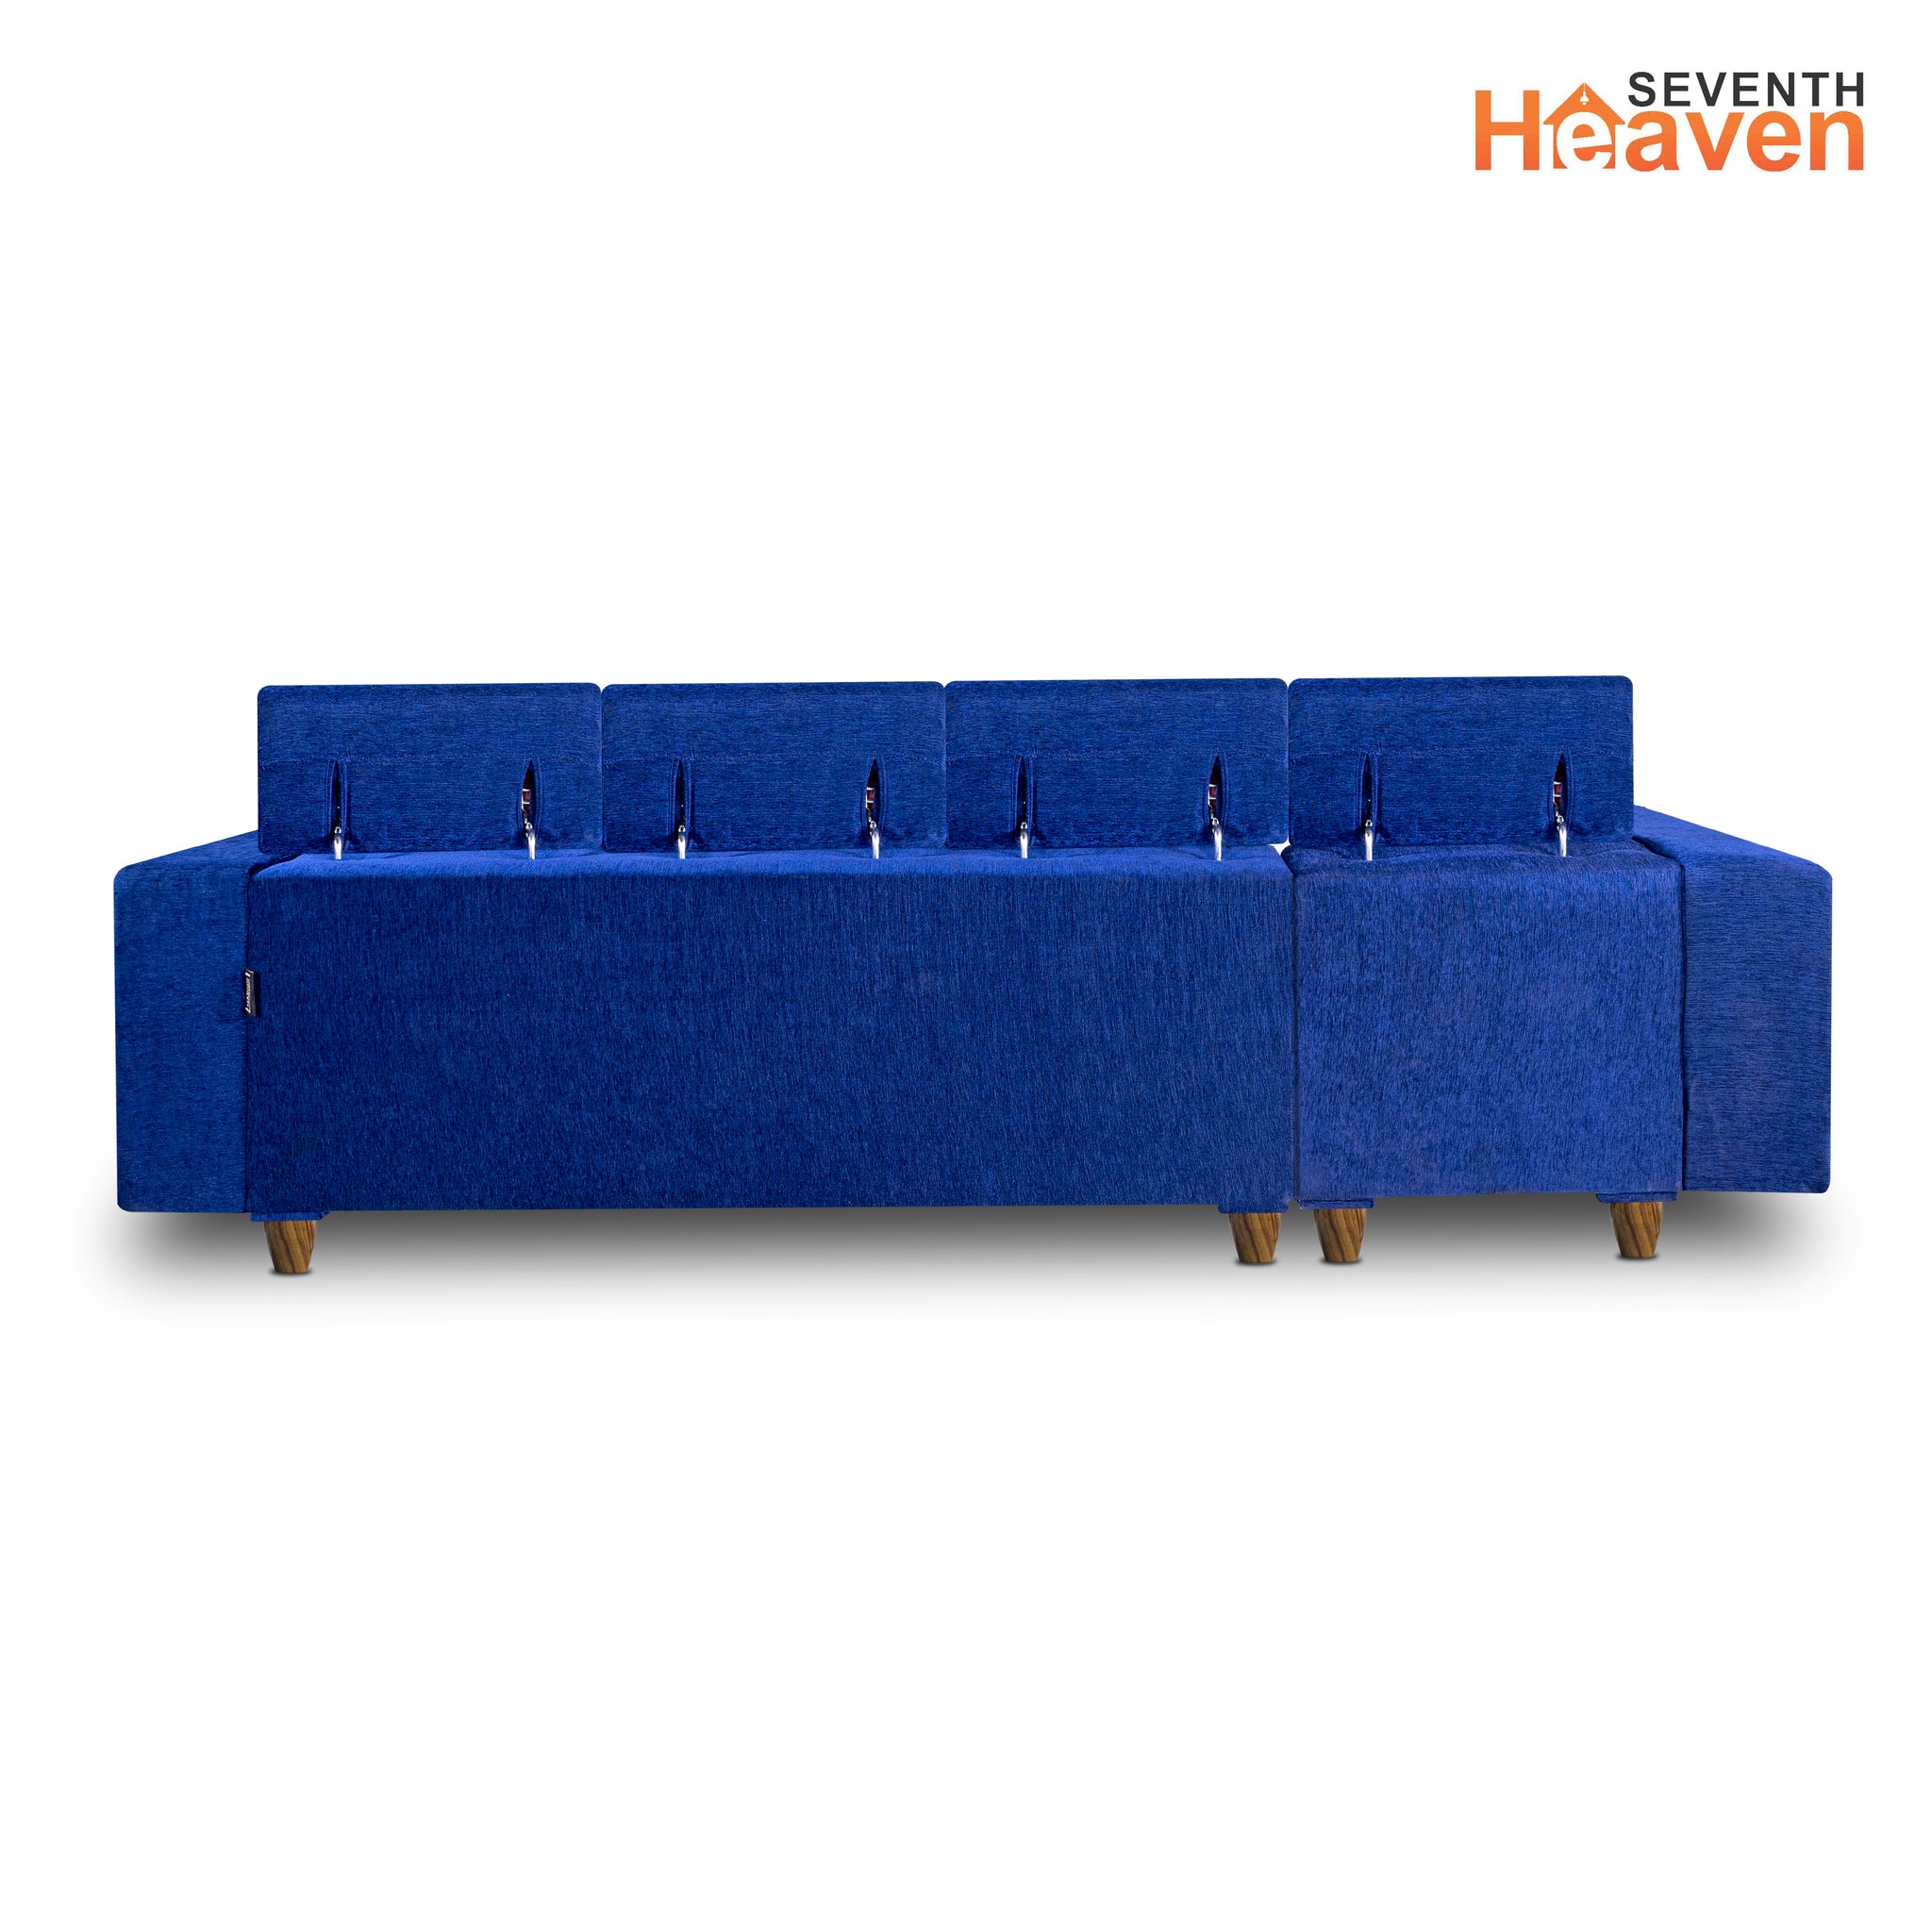 Berlin 6 Seater Sofa, Extra Spacious, Chenille Molfino Fabric with 3 Years Warranty( Finish Color - Blue, Style - Left Corner Sofa)